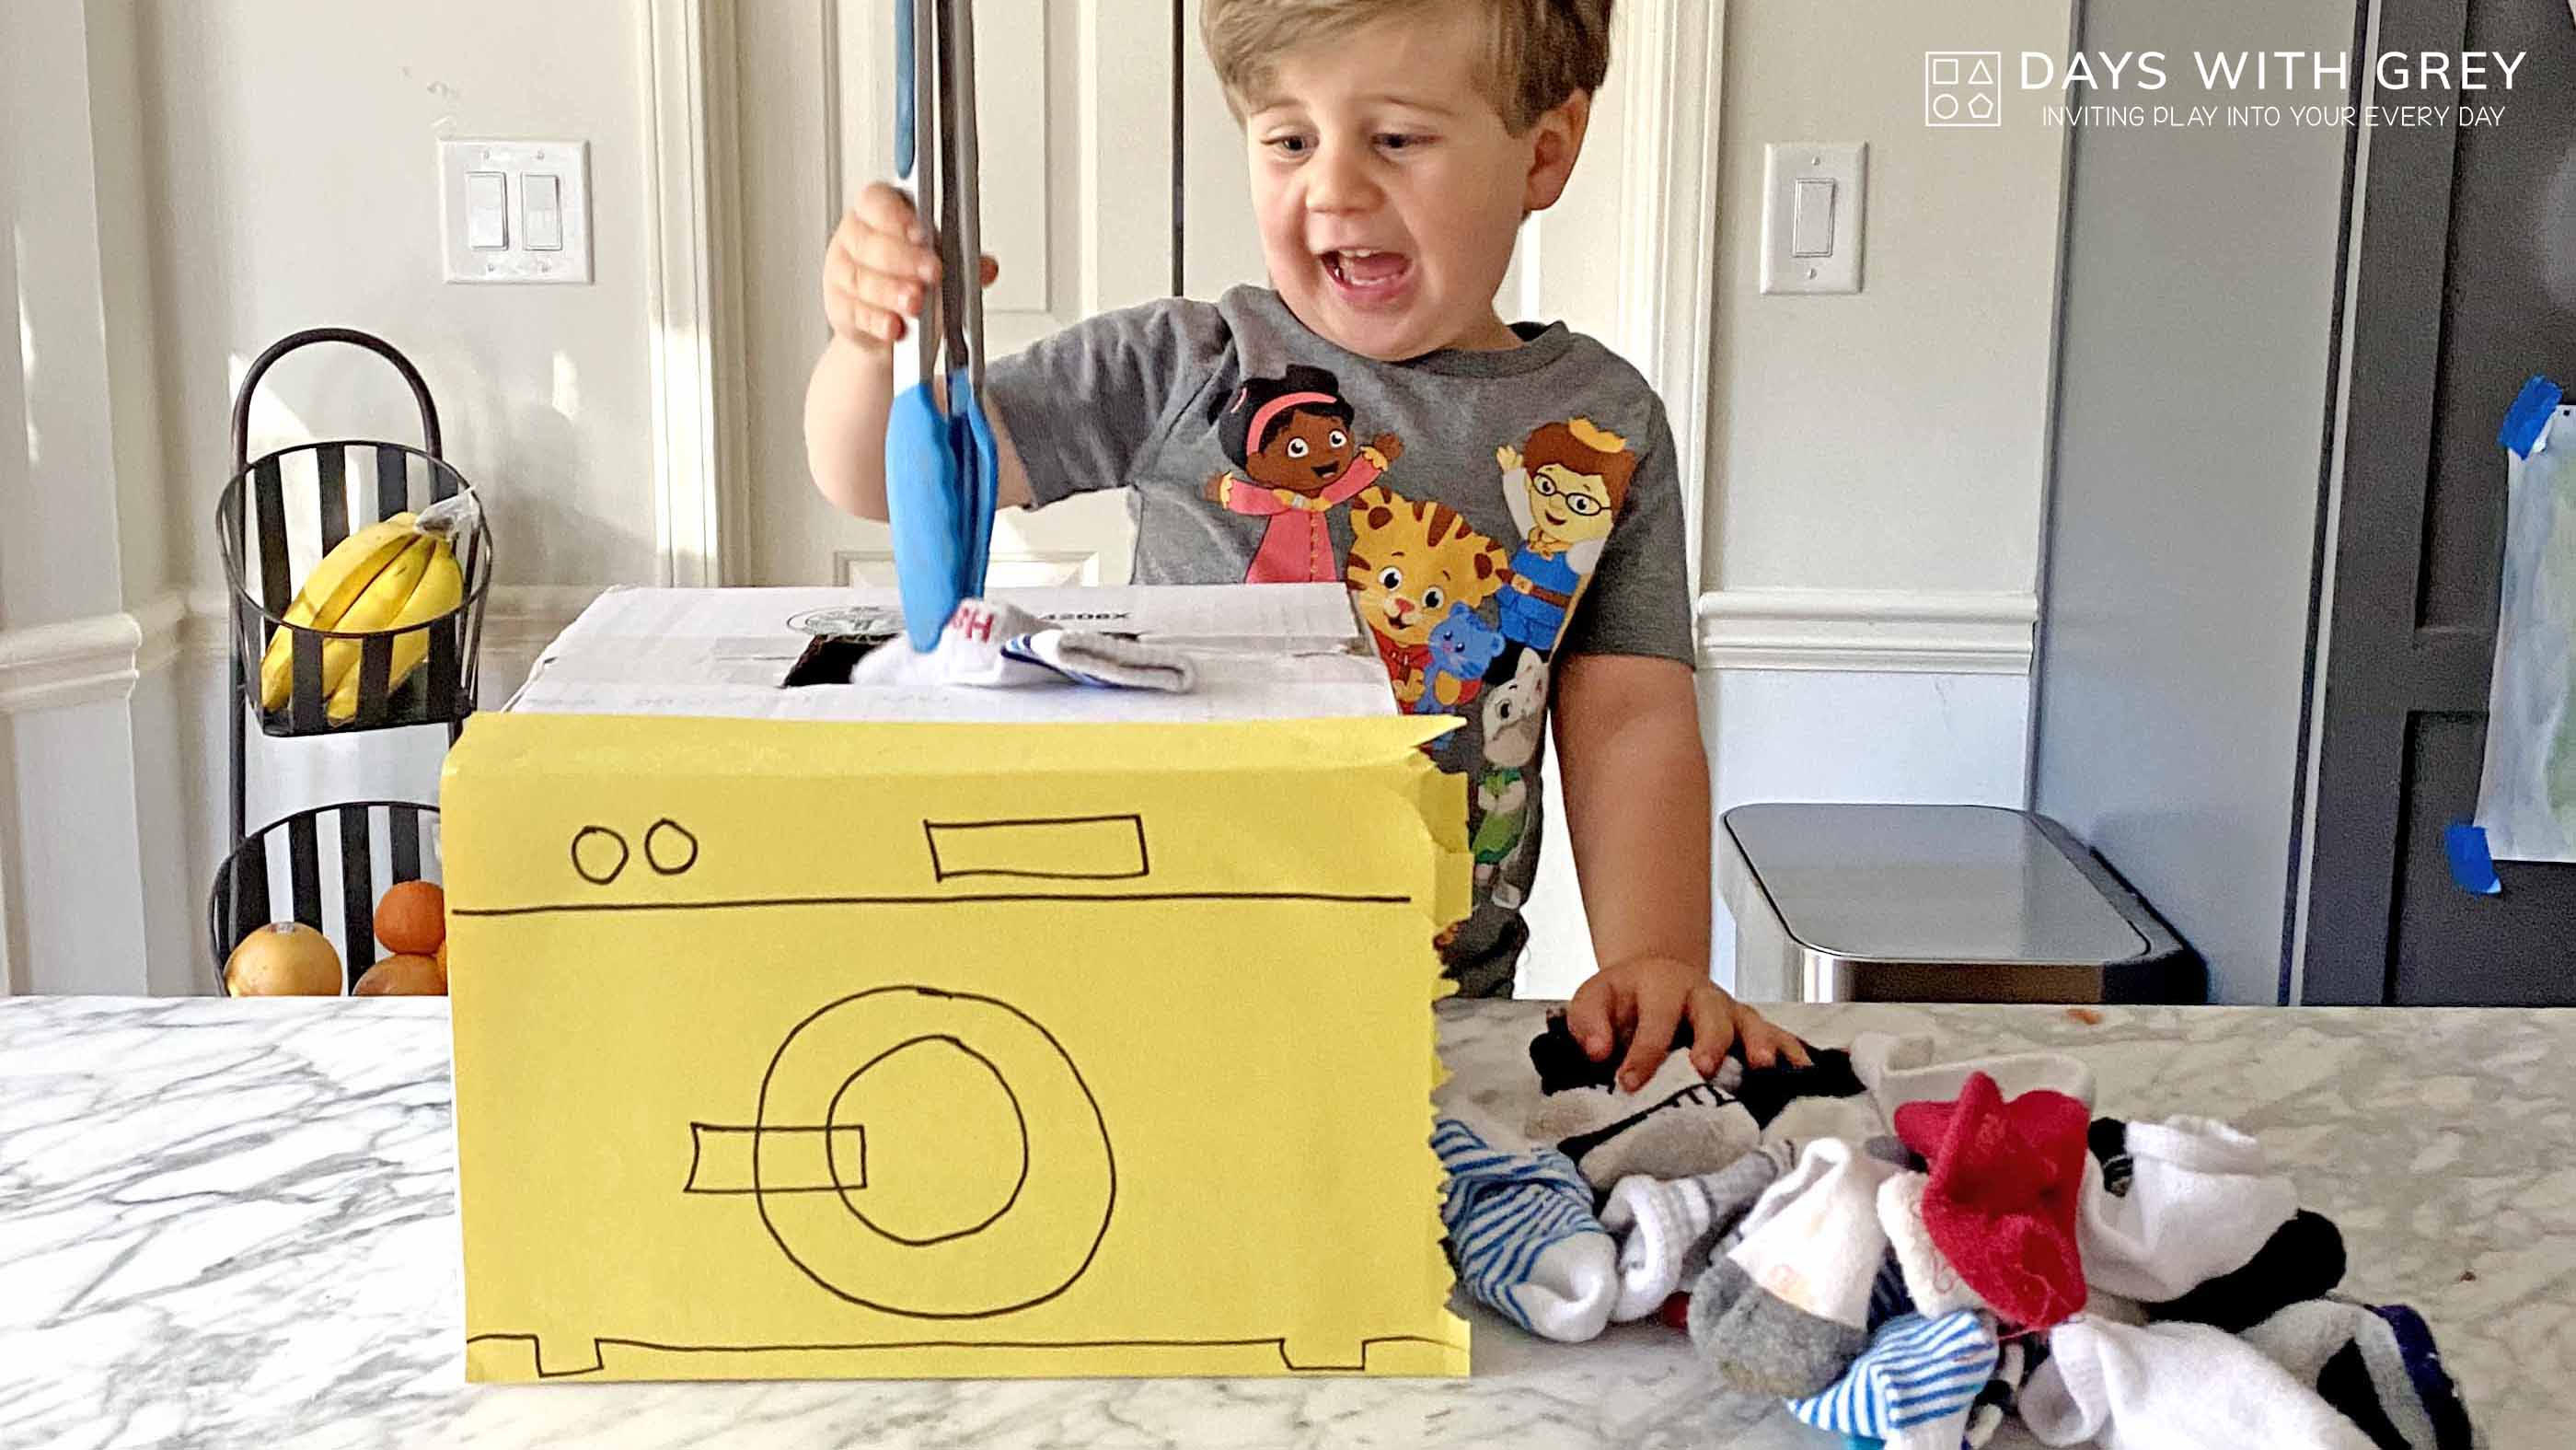 A young boy puts socks into a cardboard washing machine using tongs for a story on toddler activities you can set up the night before